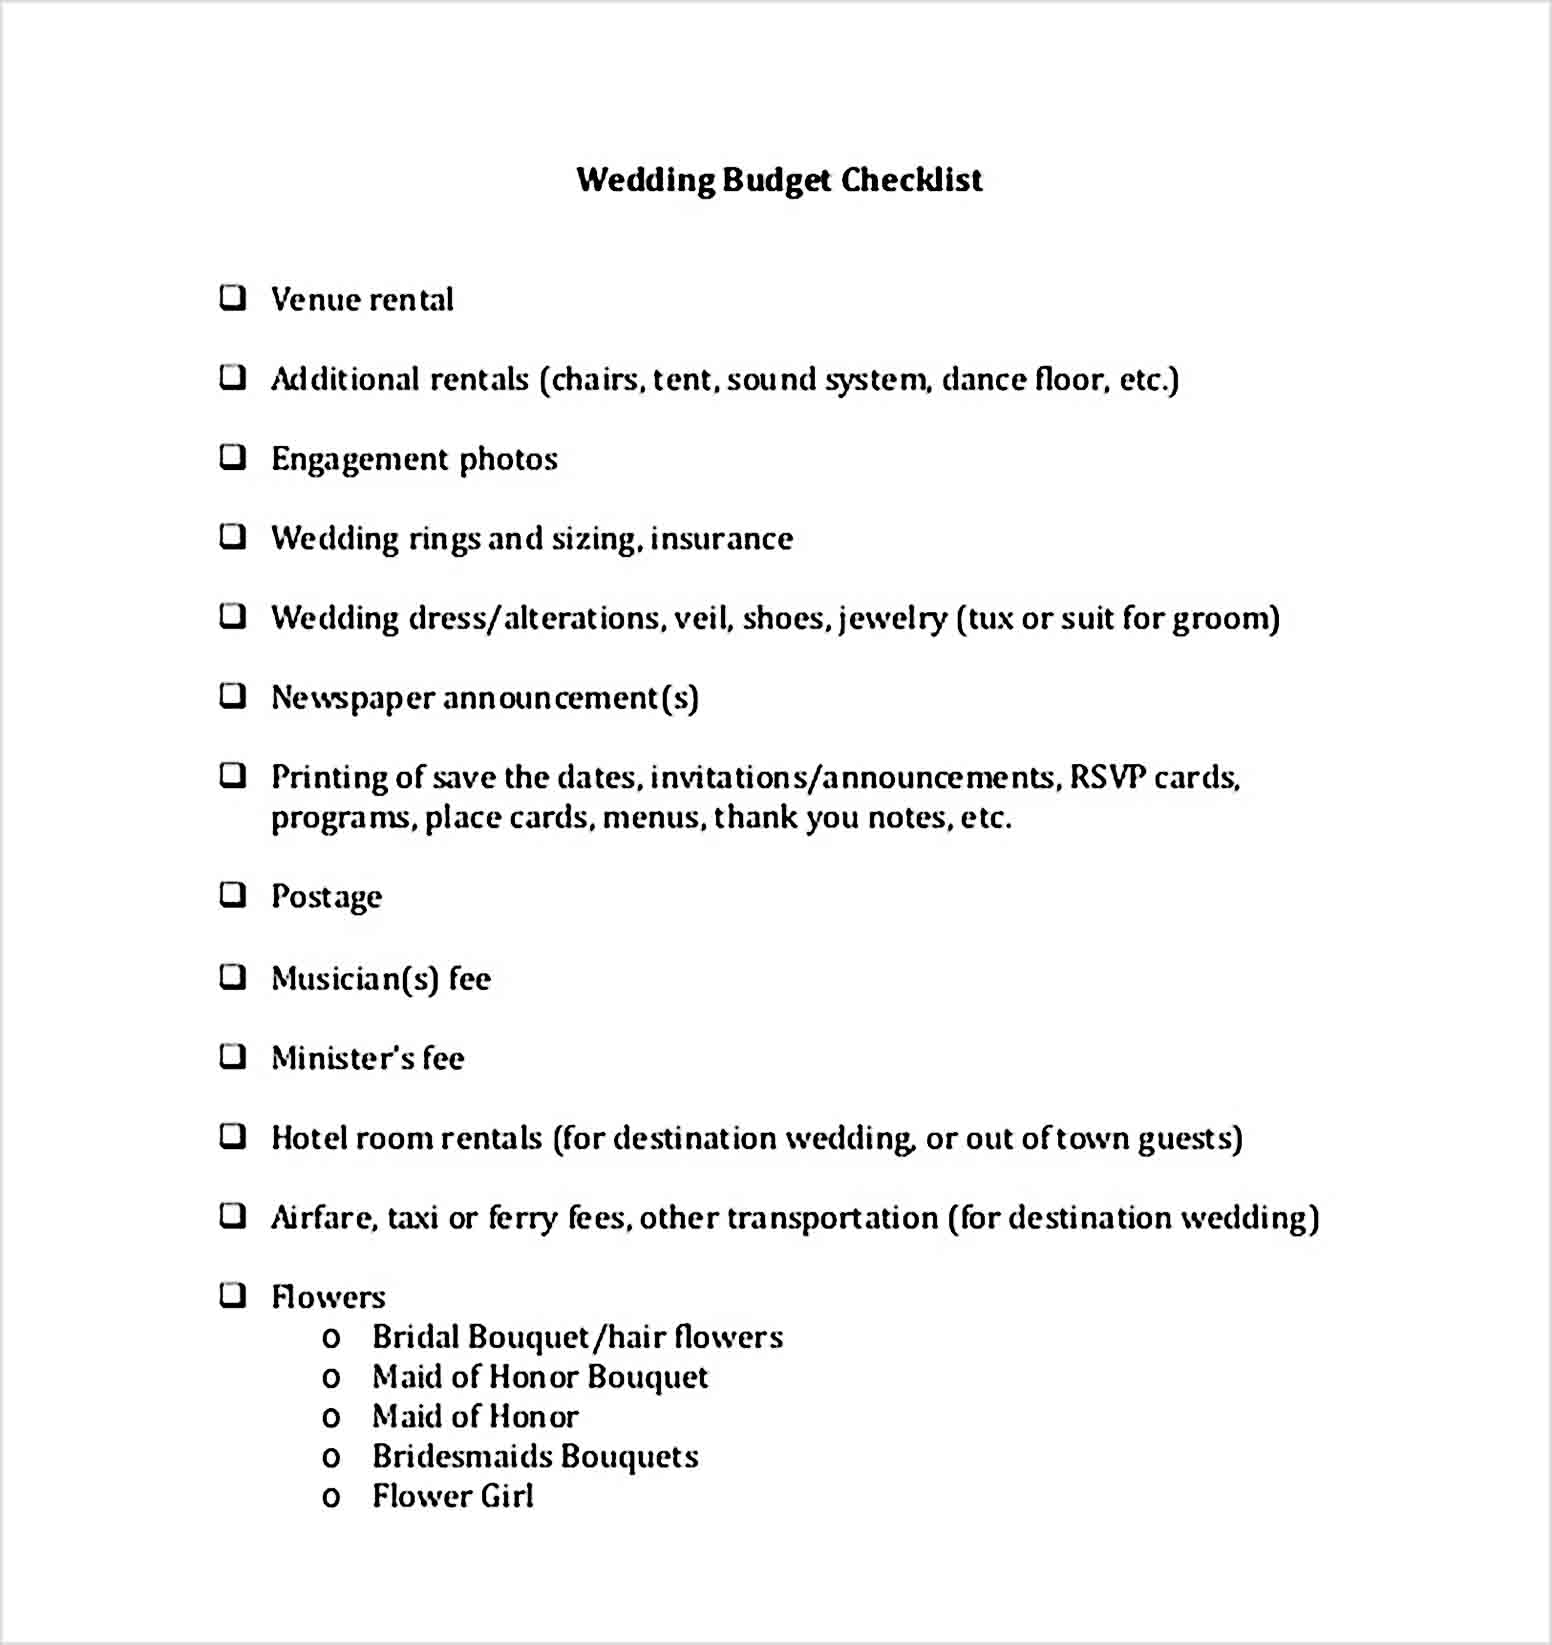 Wedding Budget Checklist Template For Download